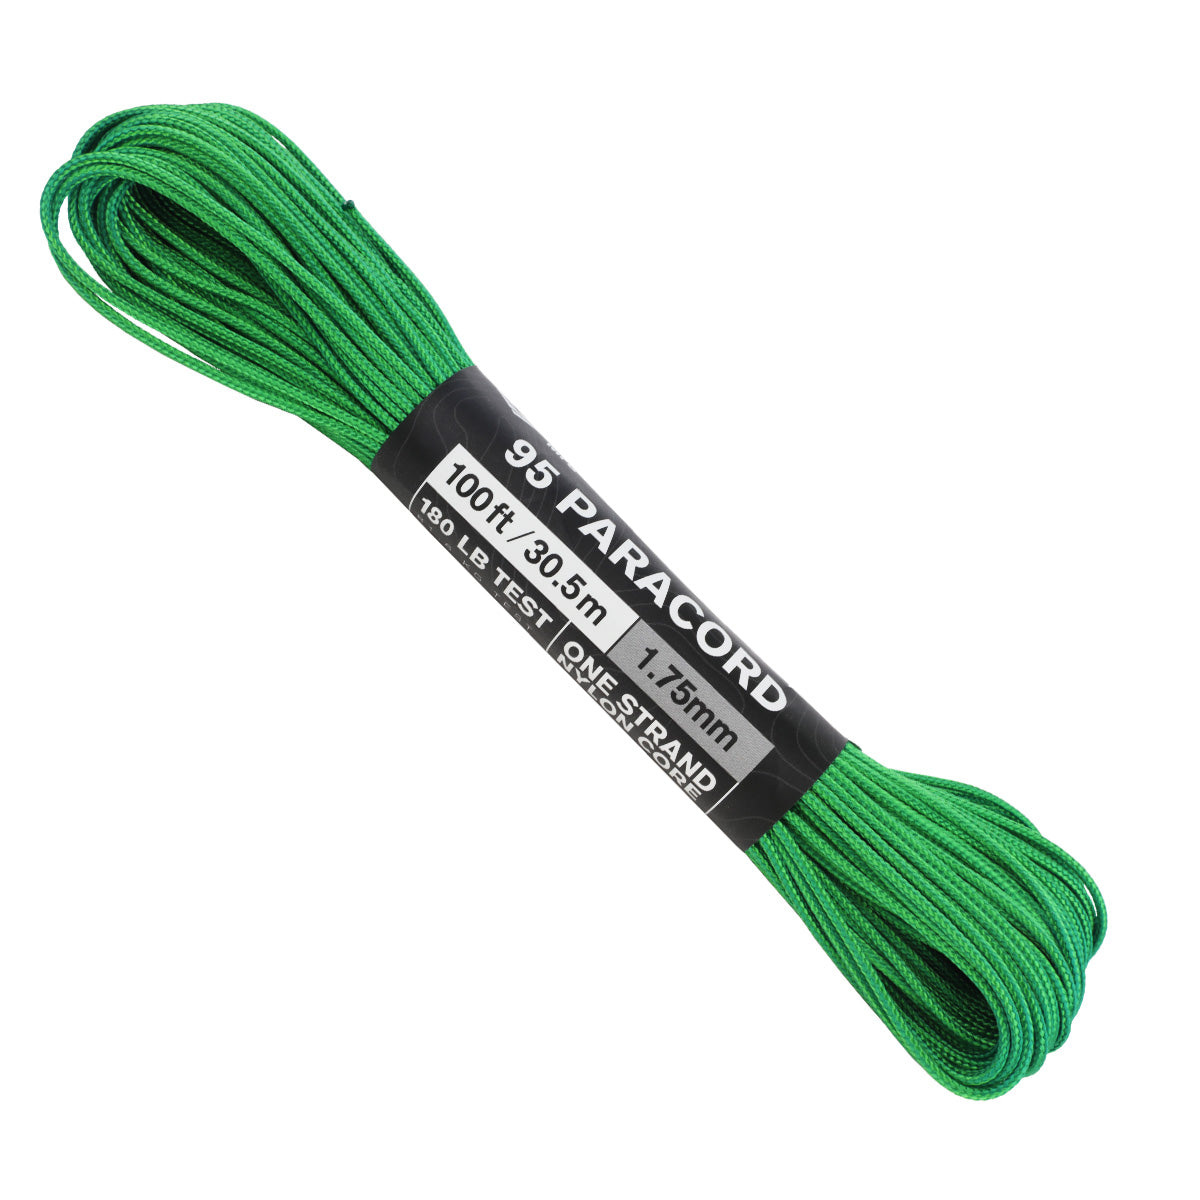 95 Paracord - Green – Atwood Rope MFG